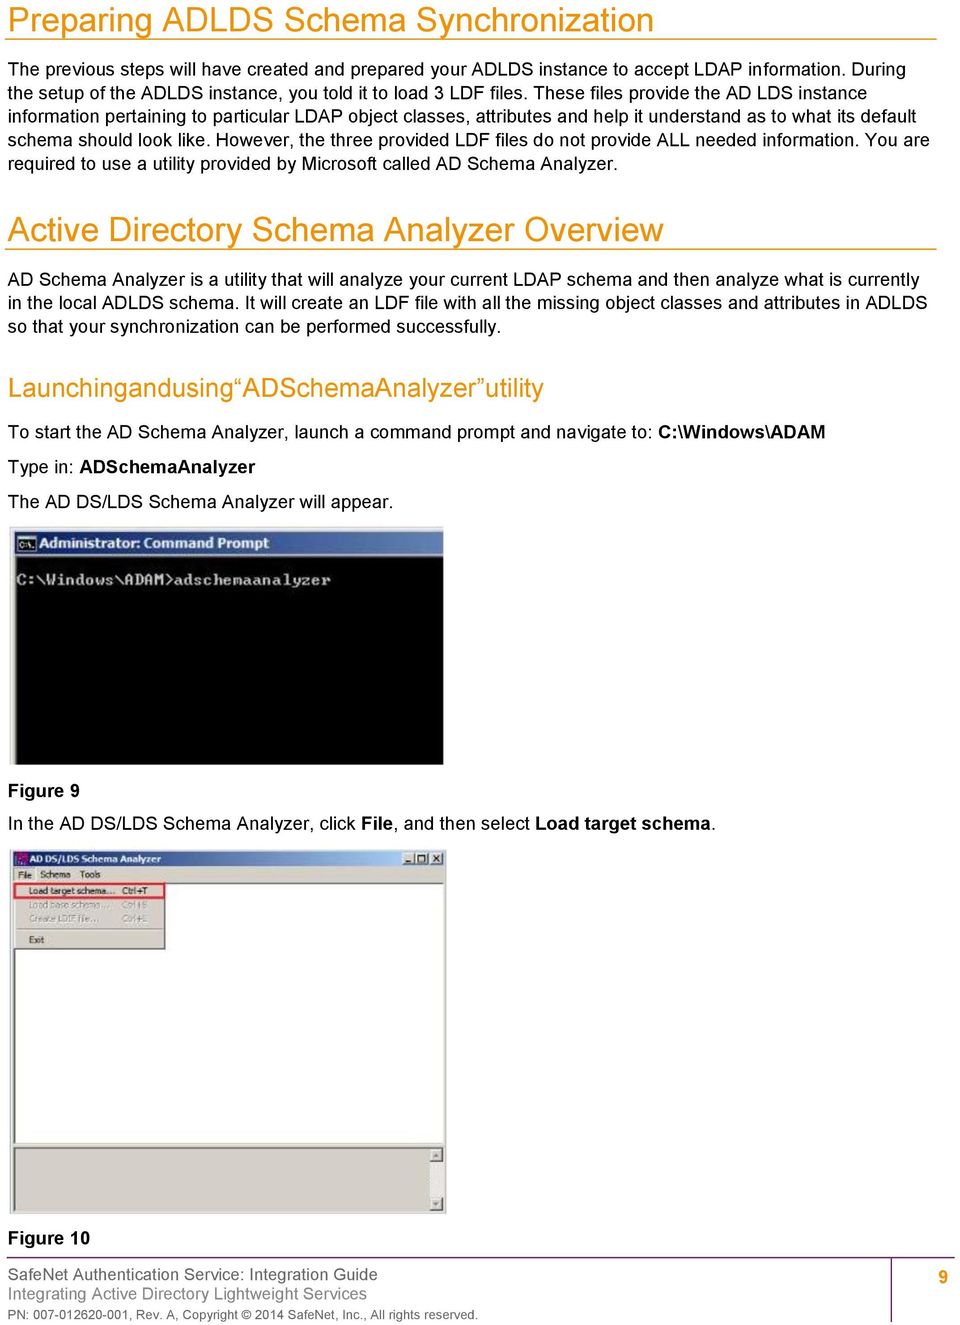 These files provide the AD LDS instance information pertaining to particular LDAP object classes, attributes and help it understand as to what its default schema should look like.